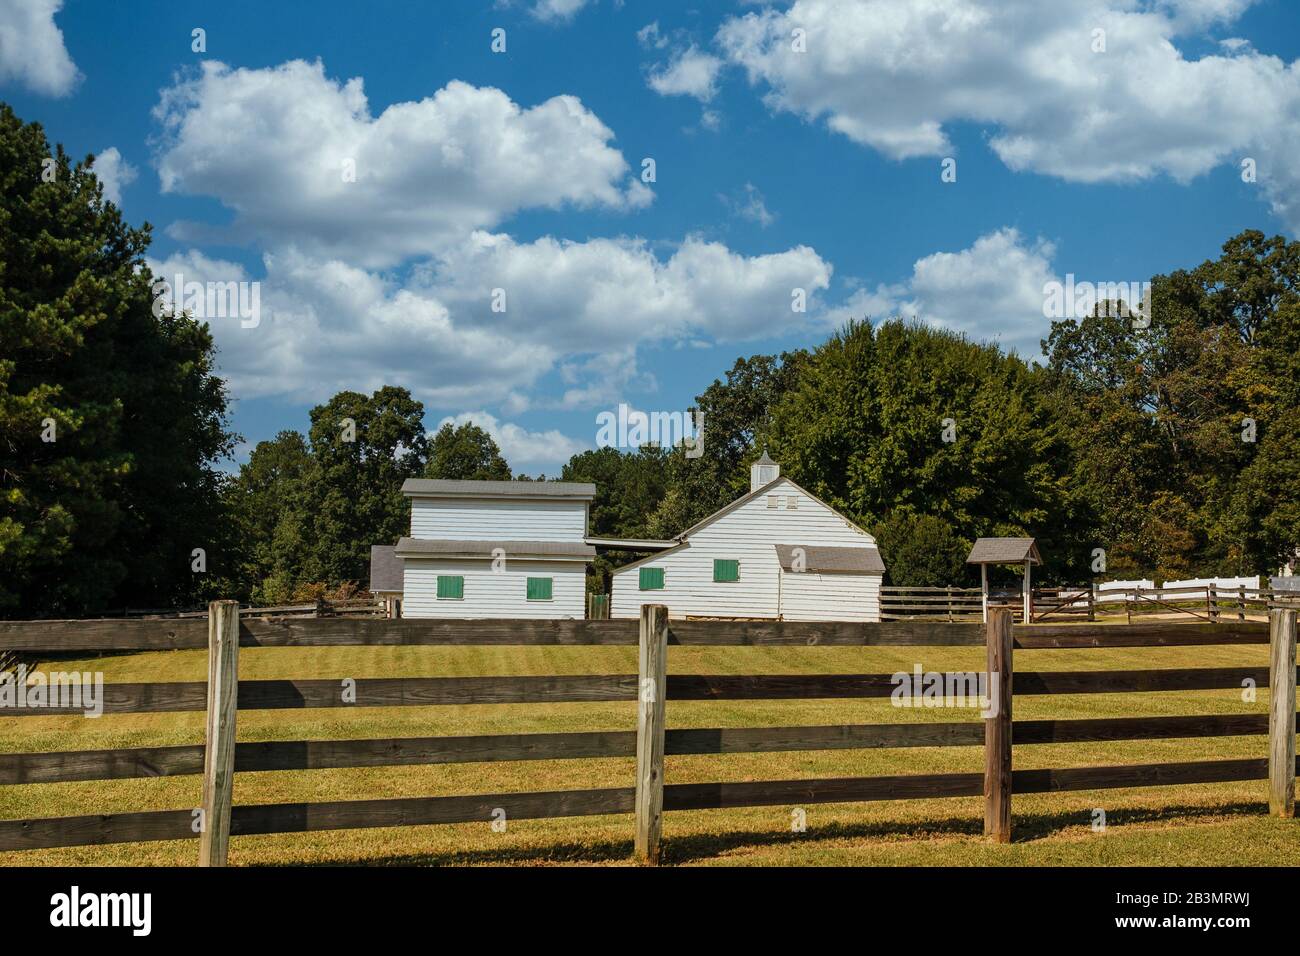 Old Barns with Green Shutters Past Fence Stock Photo